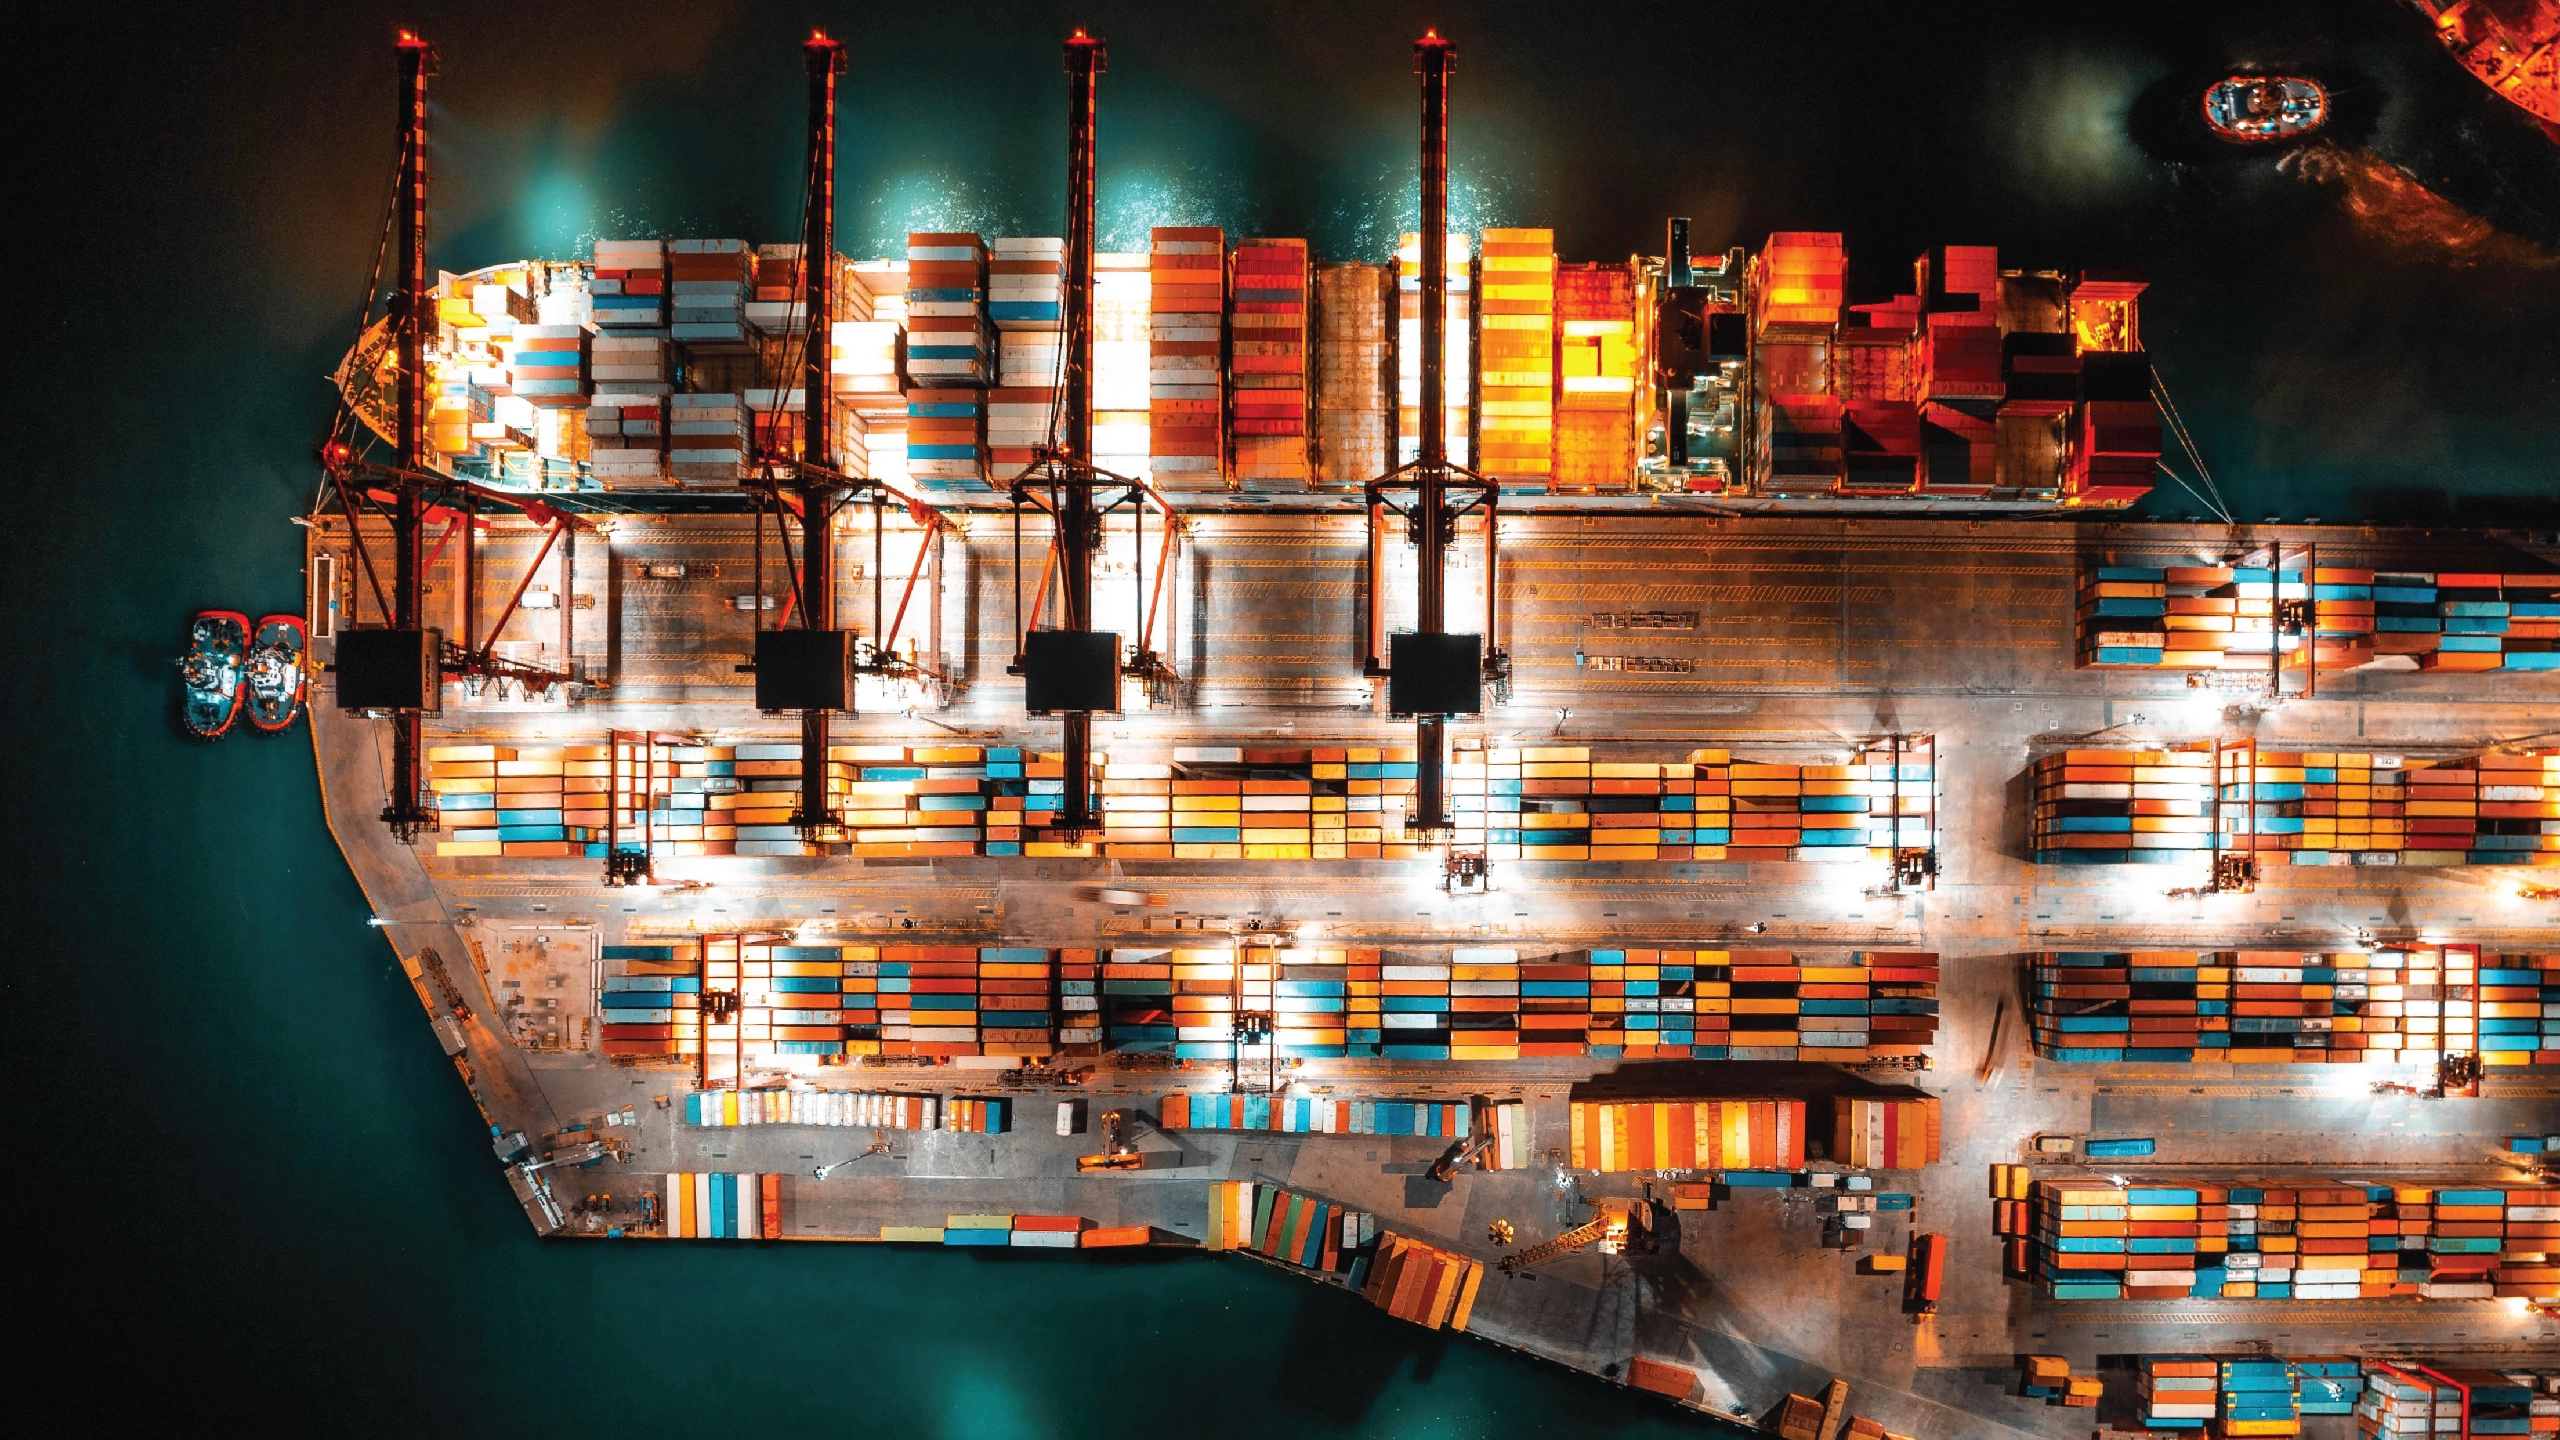 An aerial view of a container port at night.